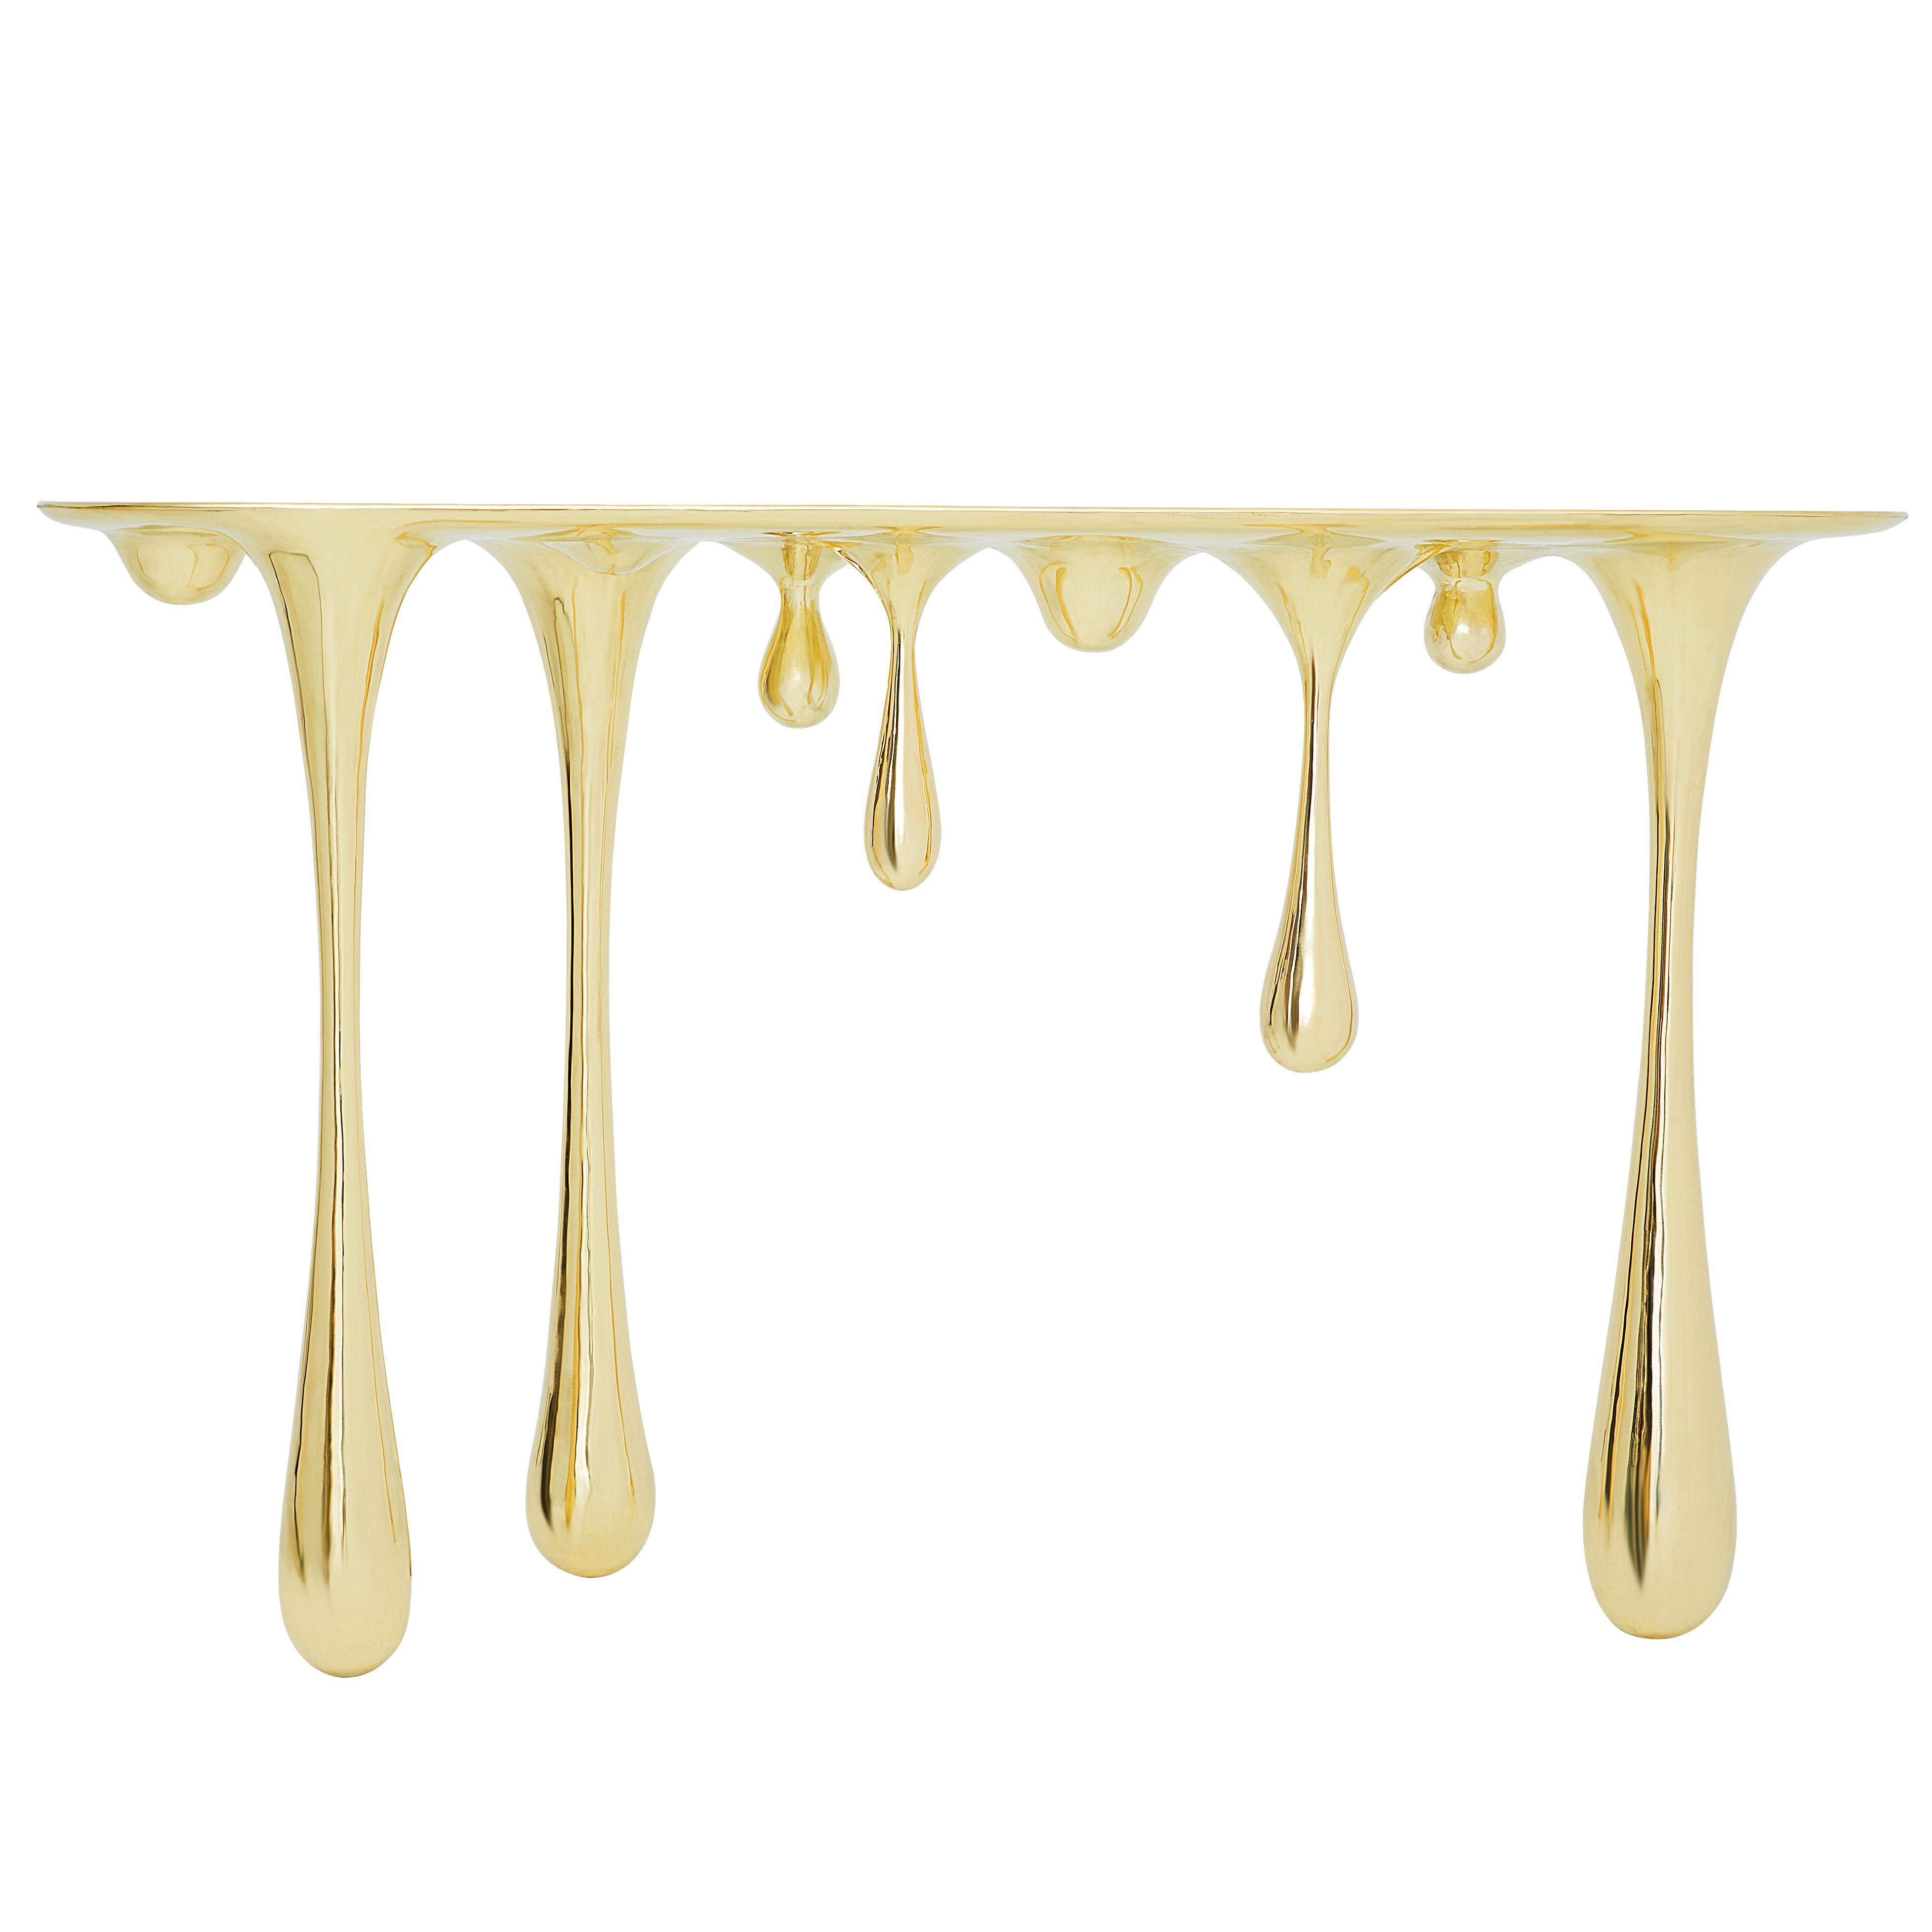 Melting Brass Console Table or Hallway Table by Zhipeng Tan